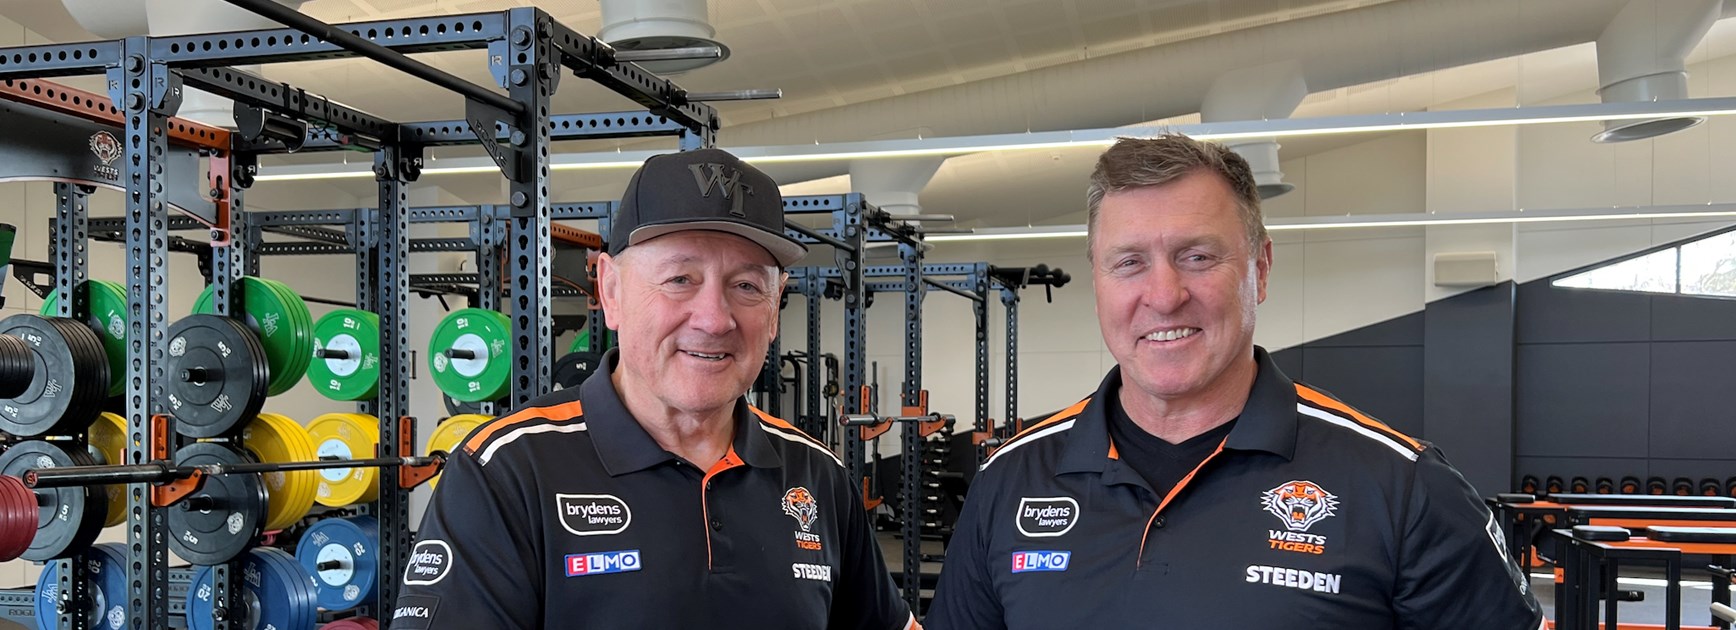 Tim Sheens and David Furner at the Centre of Excellence 